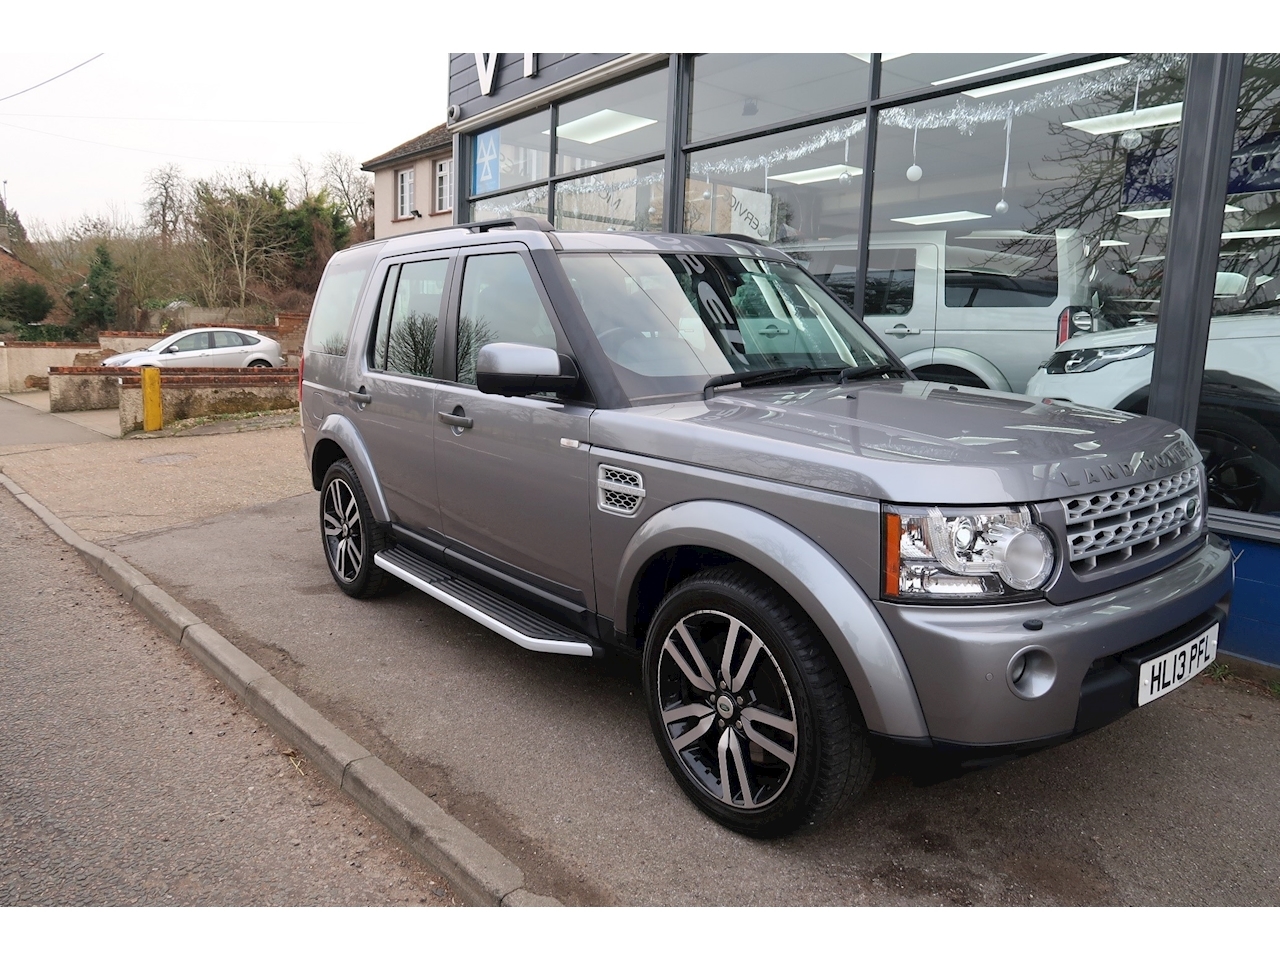 Used 2013 Land Rover Discovery Sdv6 Hse Luxury For Sale